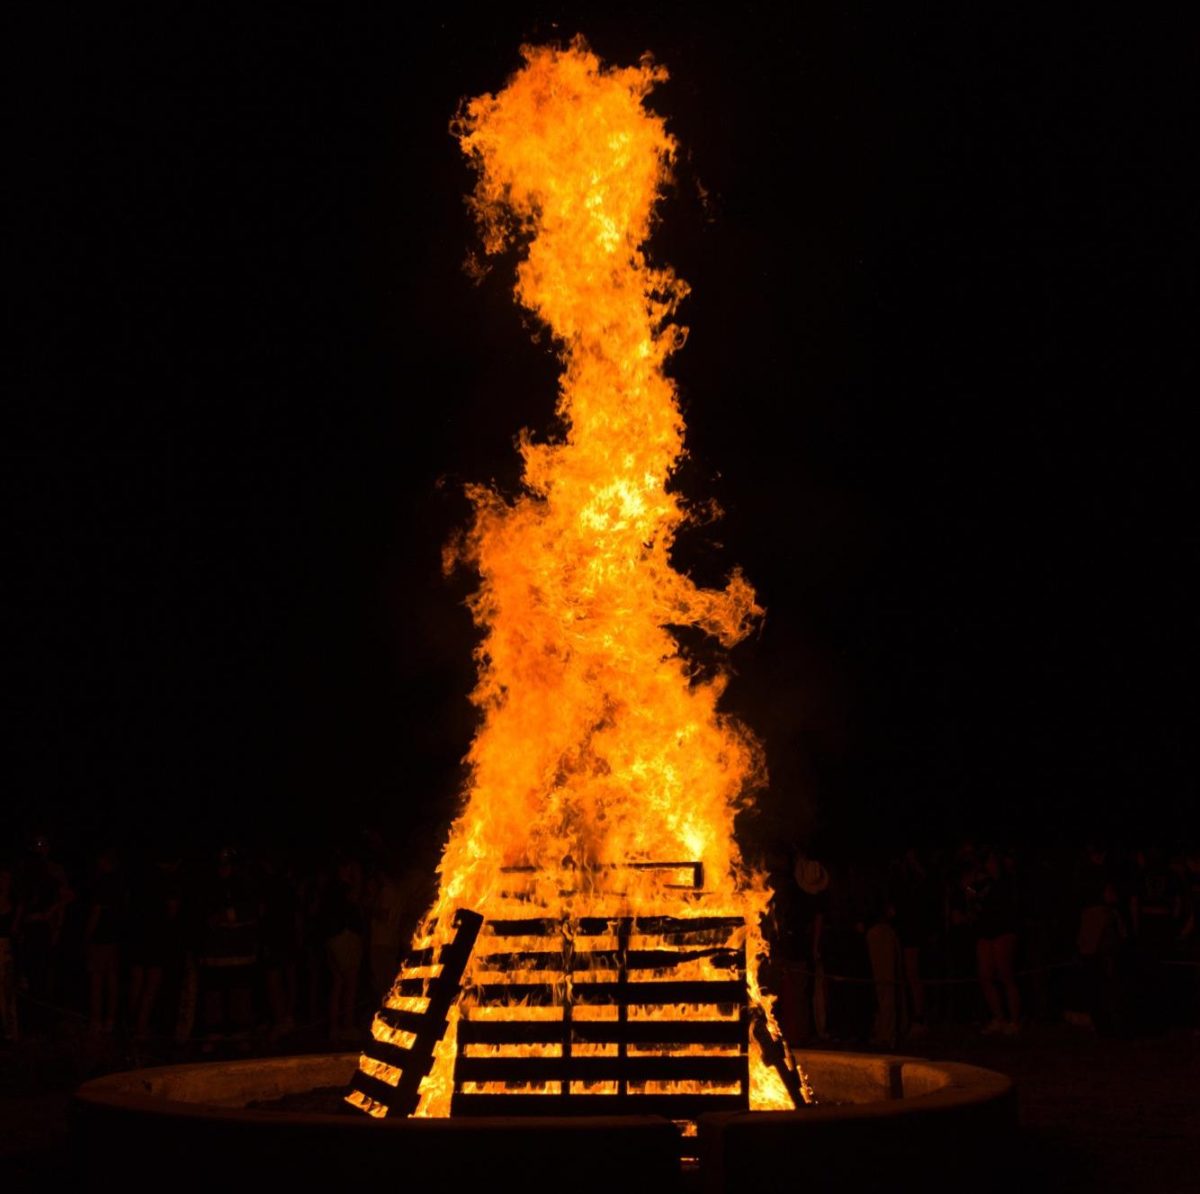 The+Homecoming+Bonfire+burns+in+the+night+Sept.+21.+According+to+Fire+Science%2C+the+fire+was+approximately+25+ft.+high+and+500+degrees+Celsius.+%E2%80%9CThe+Homecoming+Bonfire+is+always+a+cool+tradition+to+be+a+part+of+and+it%E2%80%99s+cool+to+see+the+fire+itself+and+how+high+it+can+get%2C%E2%80%9D+Mason+Conrad+%E2%80%9824+said.